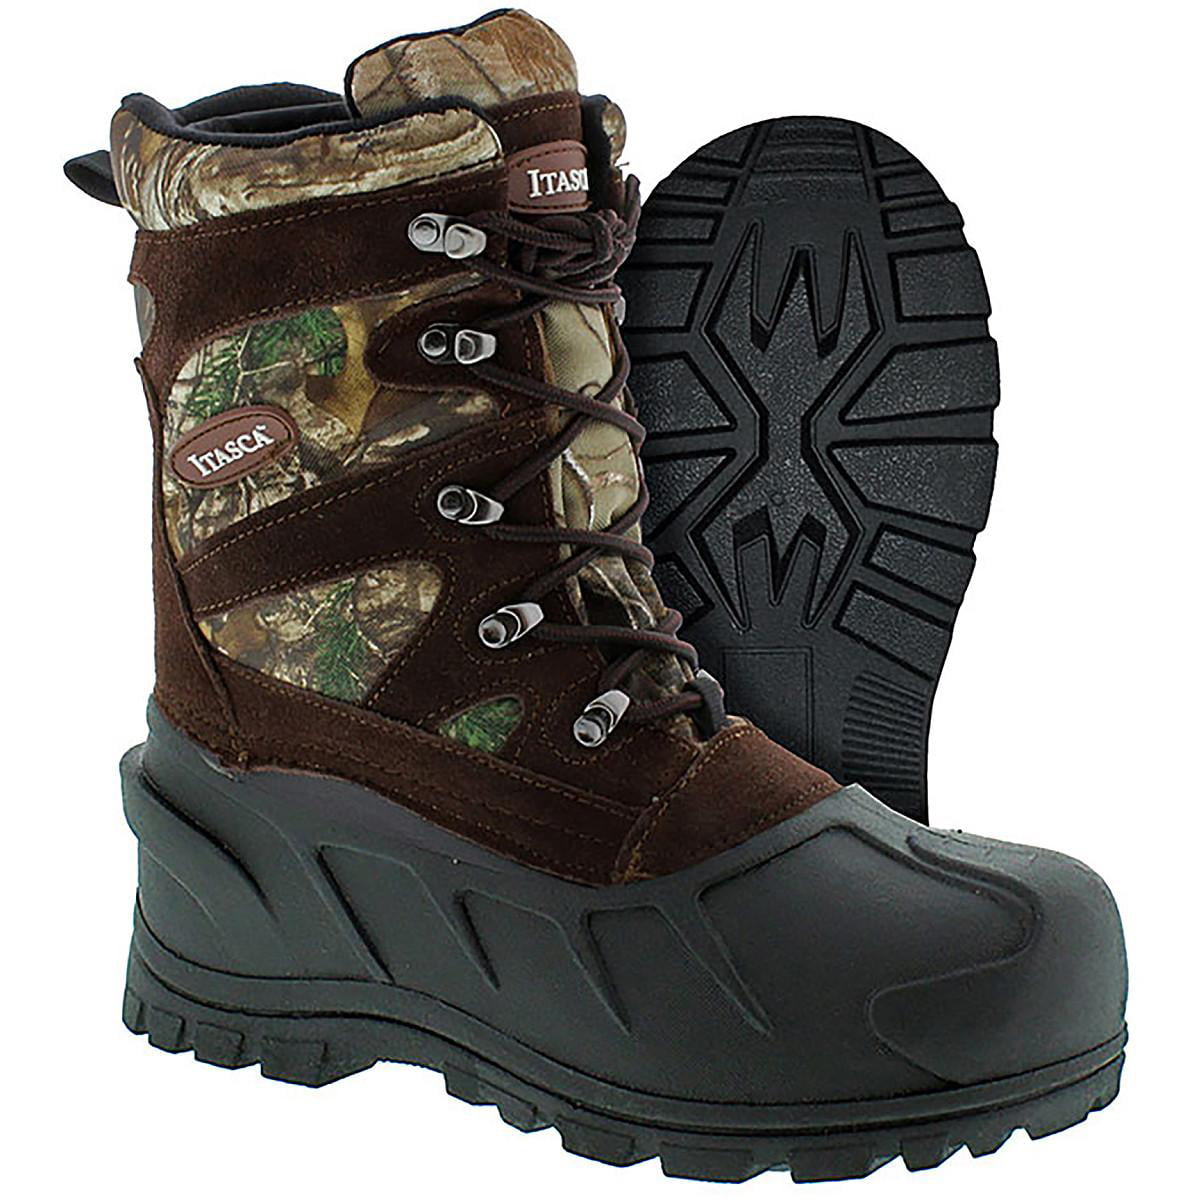 Hunting Boots Women's Itasca Swampwalker Waterproof NON INULATED Size 9 SALE 